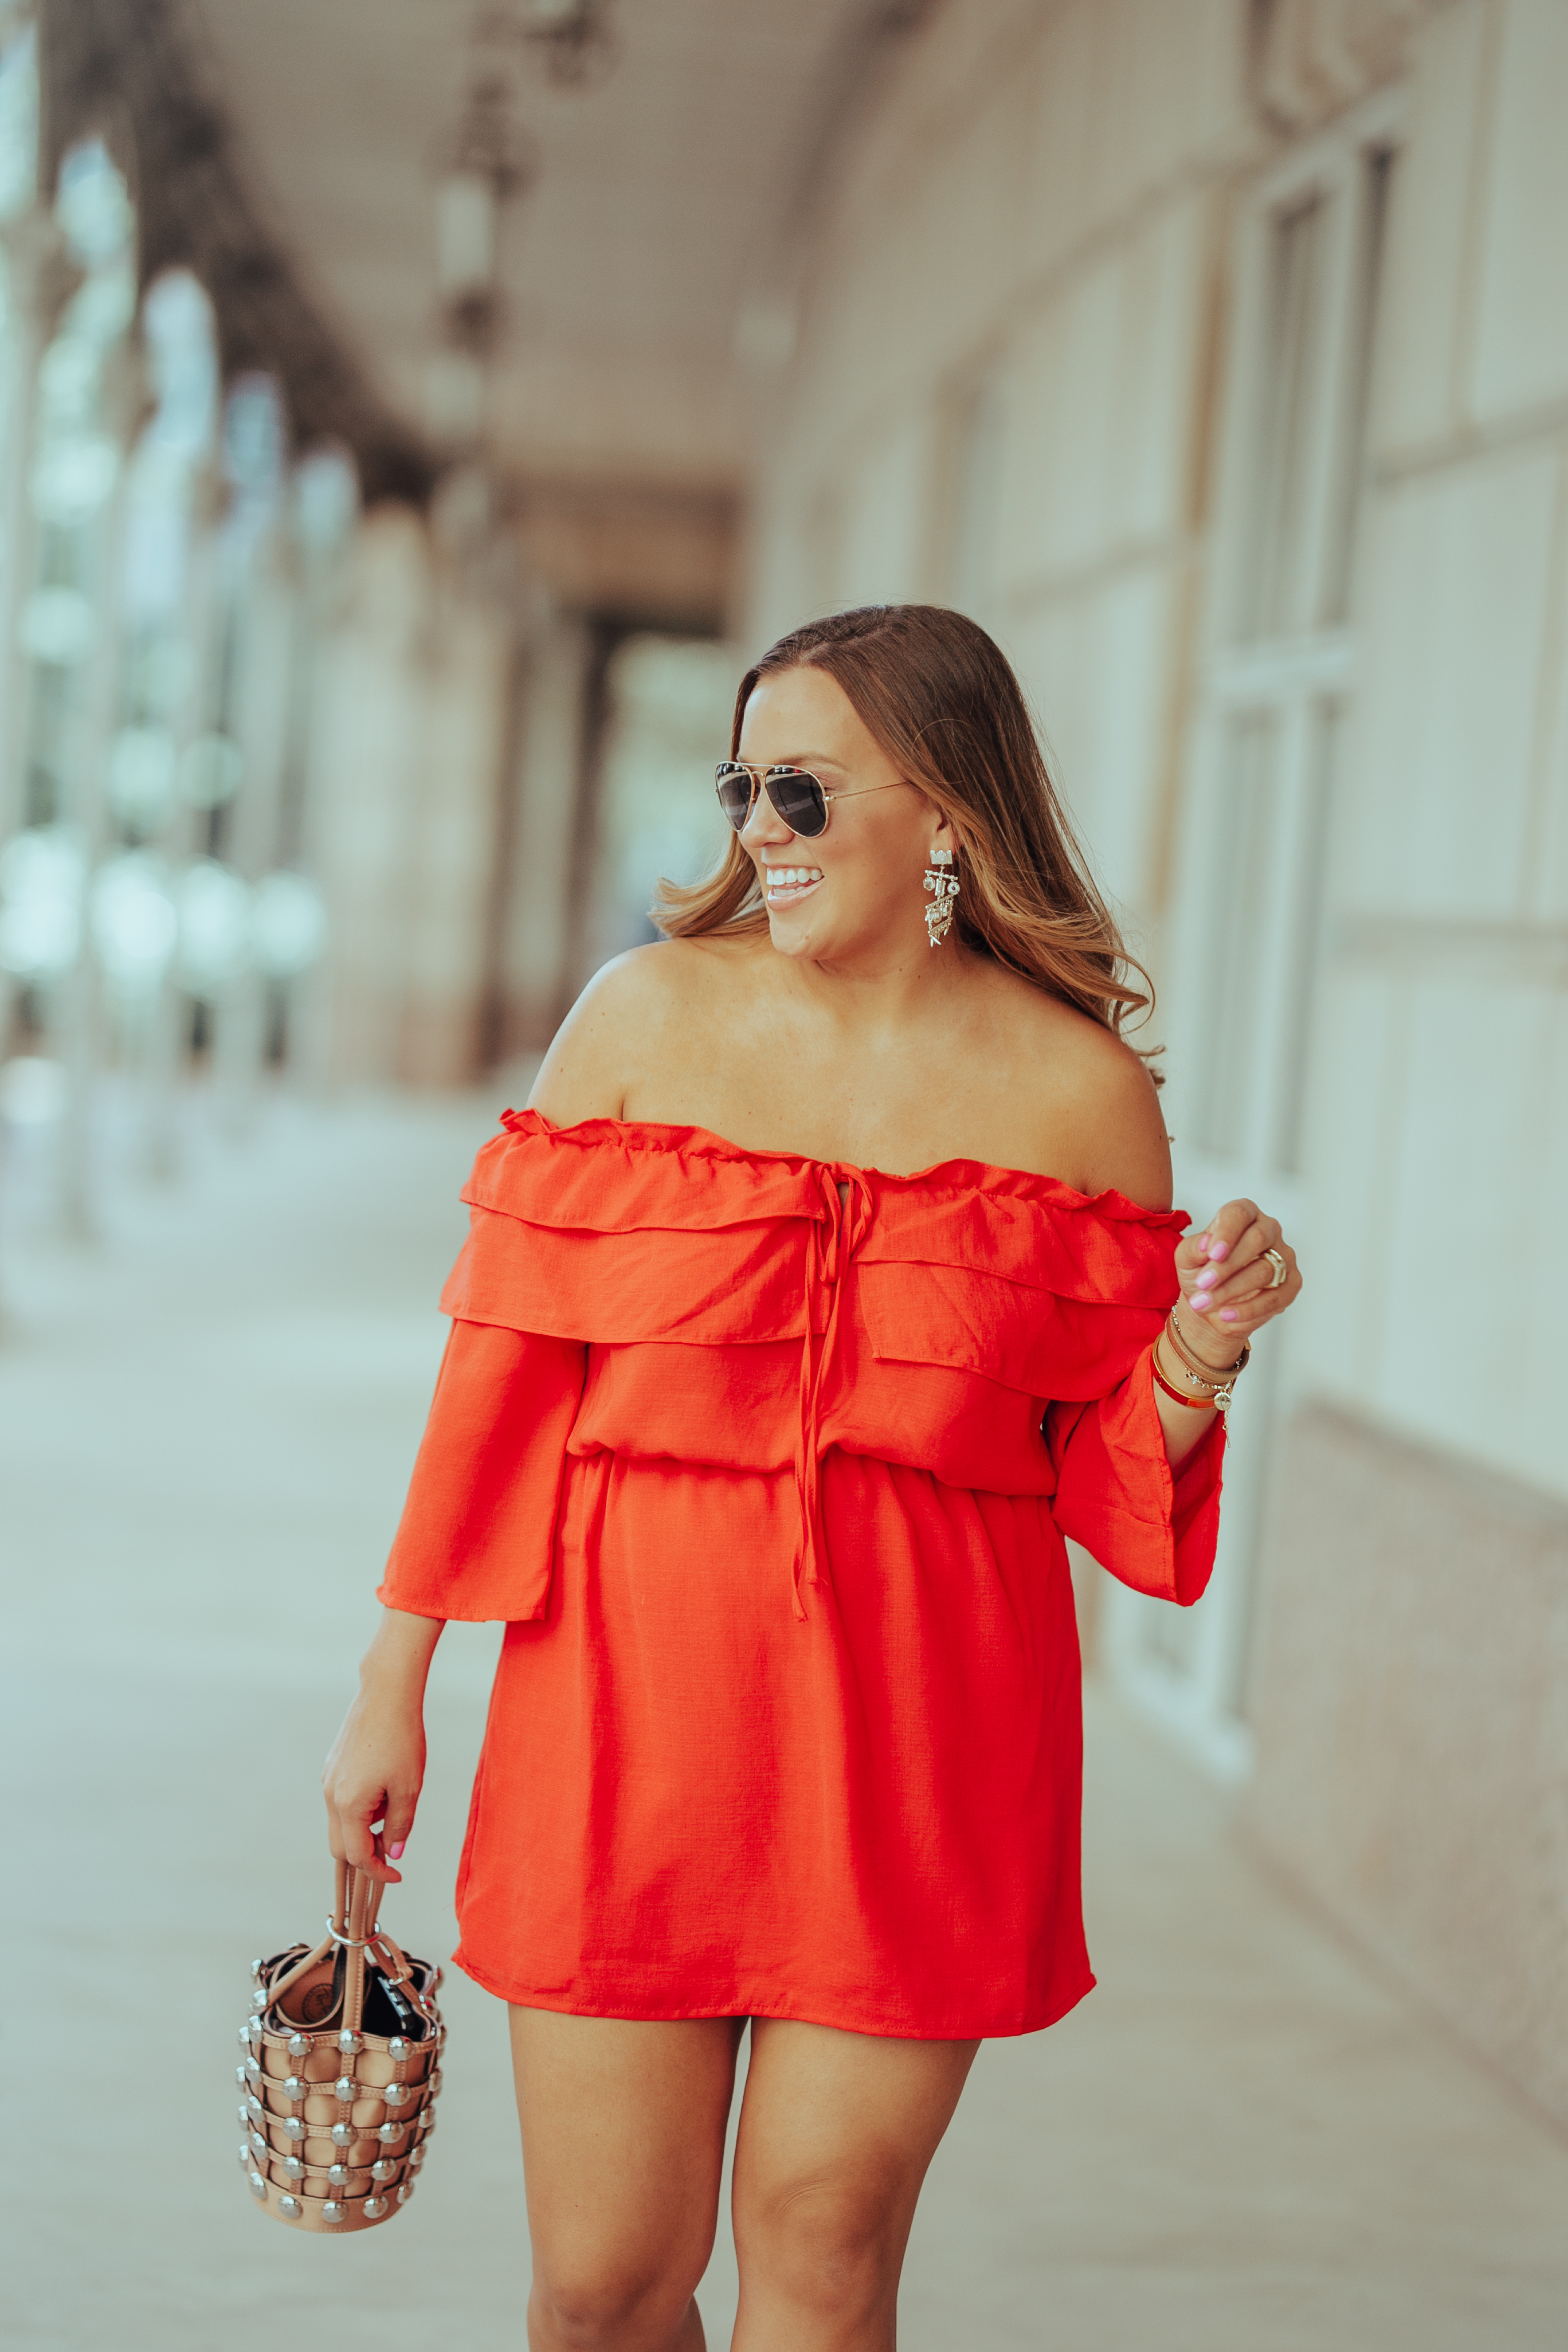 Ashley Zeal from Two Peas in a Prada shares a bright orange off the shoulder dress. She is wearing Rebecca Minkoff heels, and an Alexander Wang bag. 